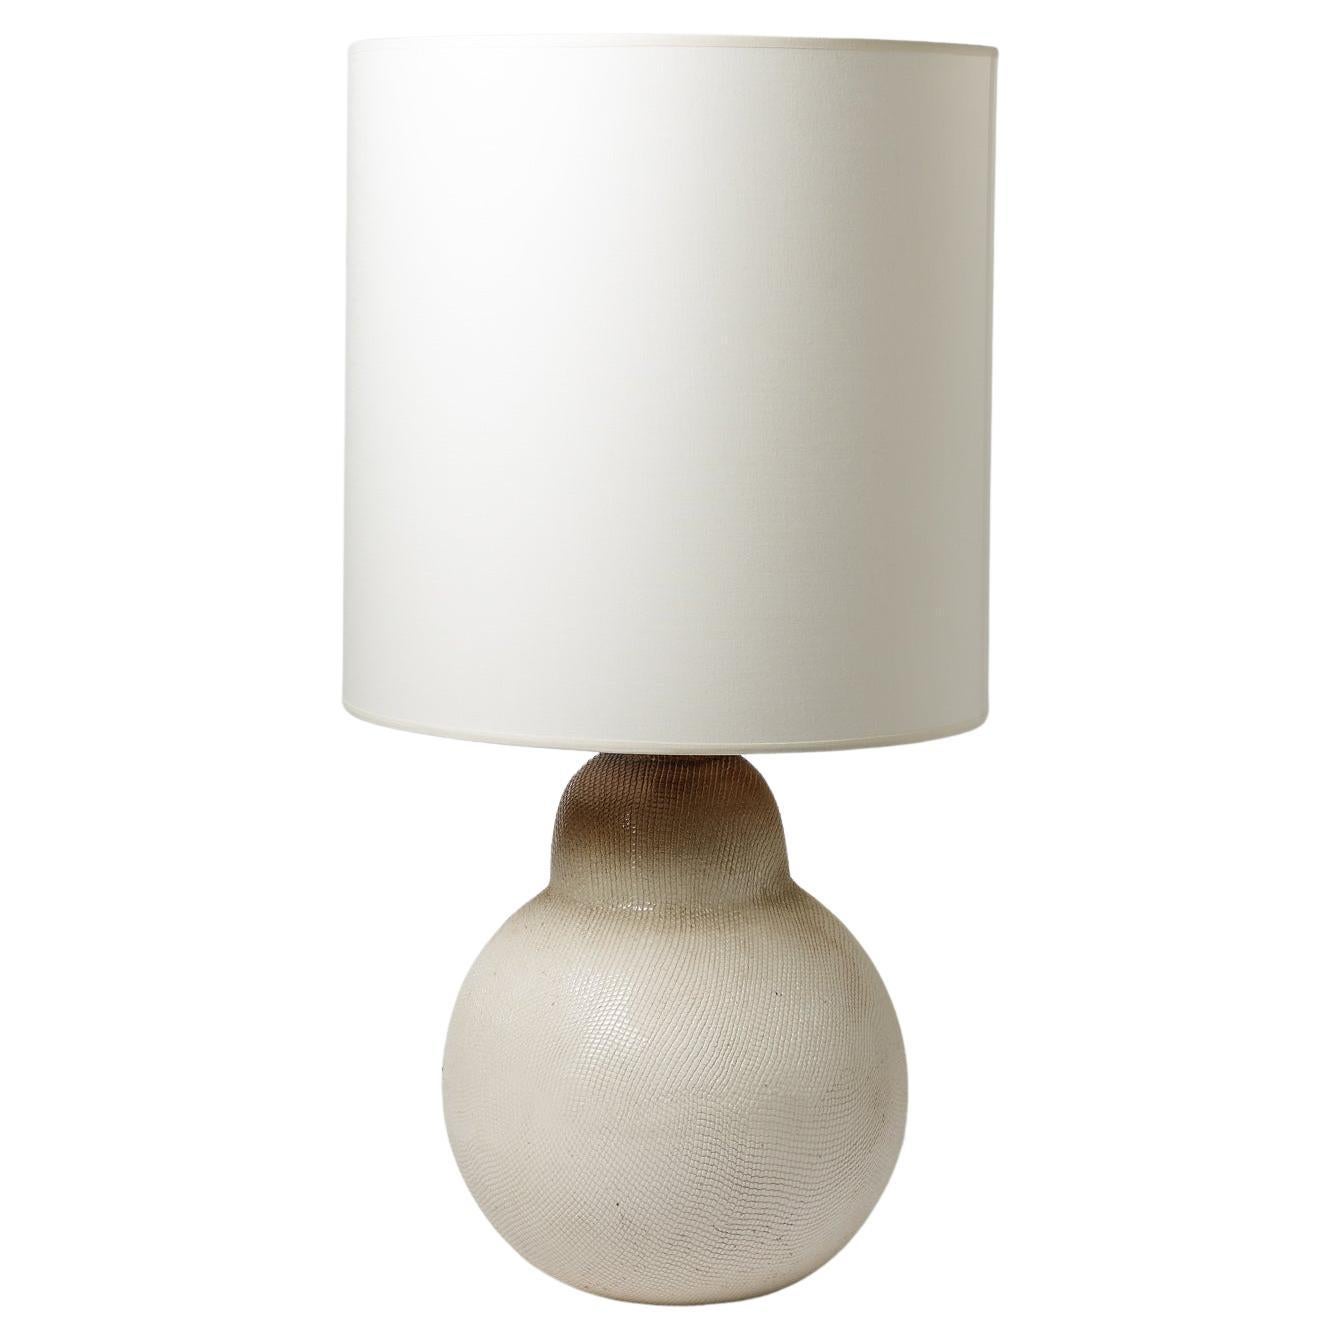 Brown and white glazed ceramic table lamp in the style of Jean Besnard, 1930